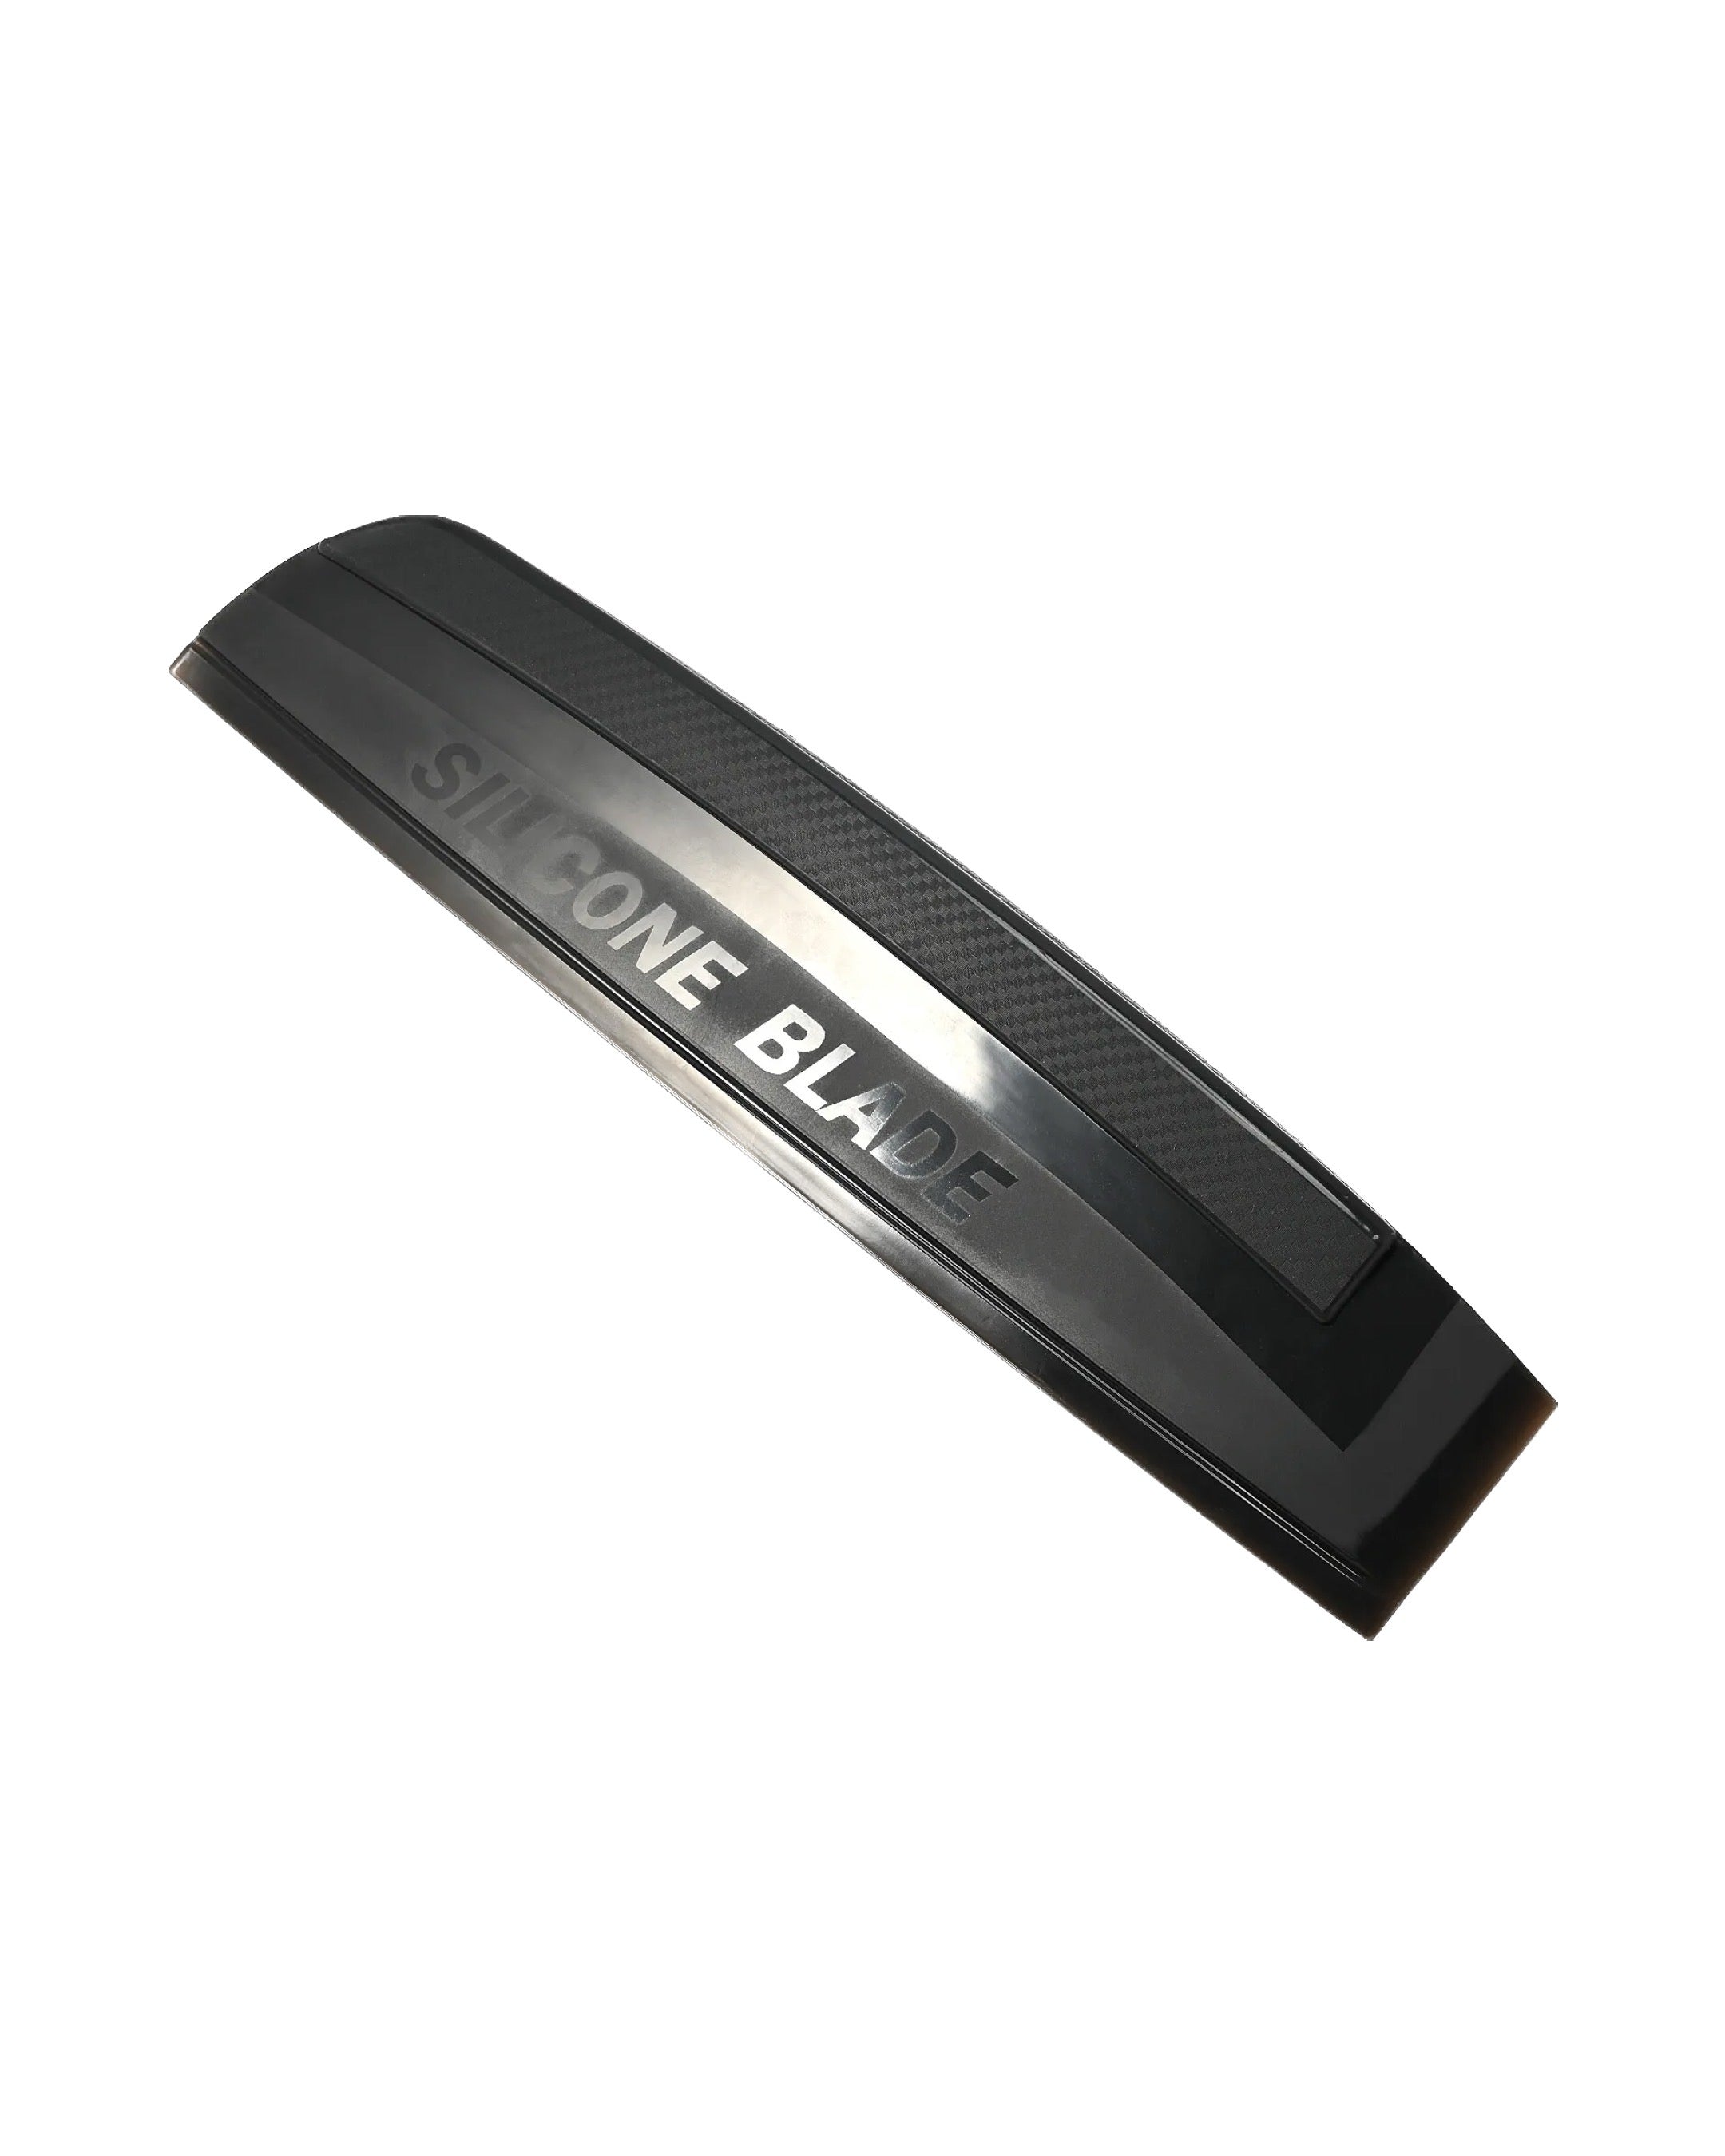 Large silicone blade- prep squeegee